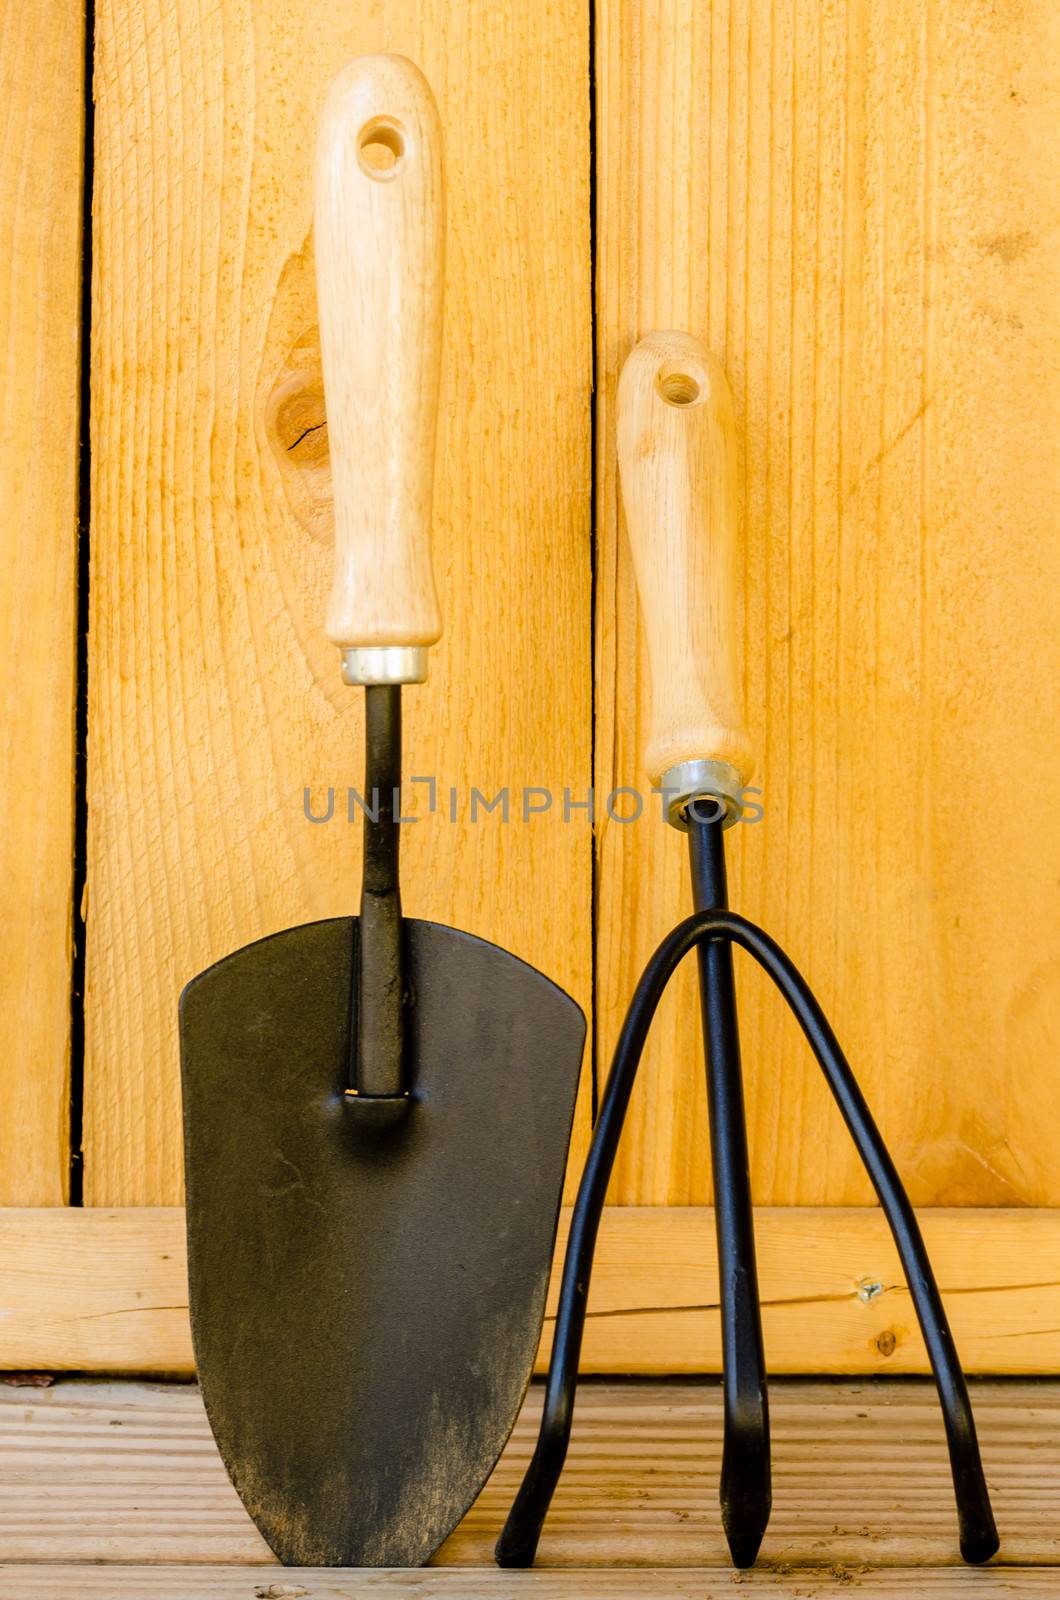 Trowel and cultivator on wood background.